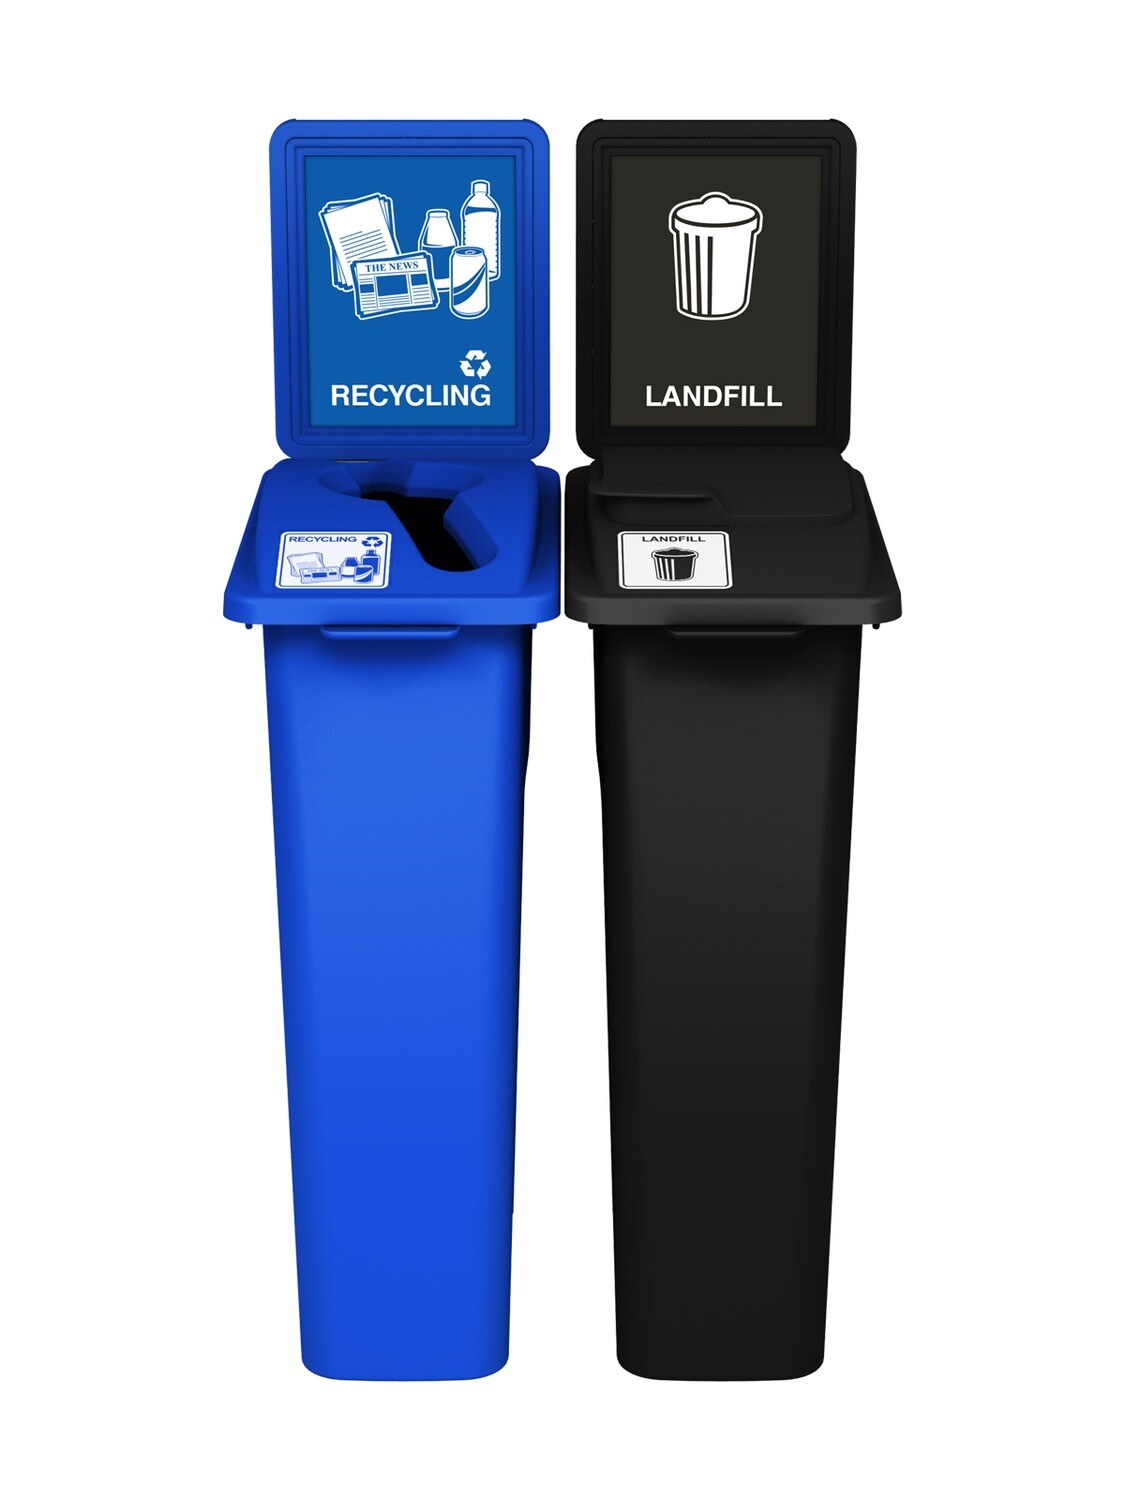 Waste Watcher® Series - 23G - Double - Blue/Black - Mixed/Vented Lift - Recycling/Landfill